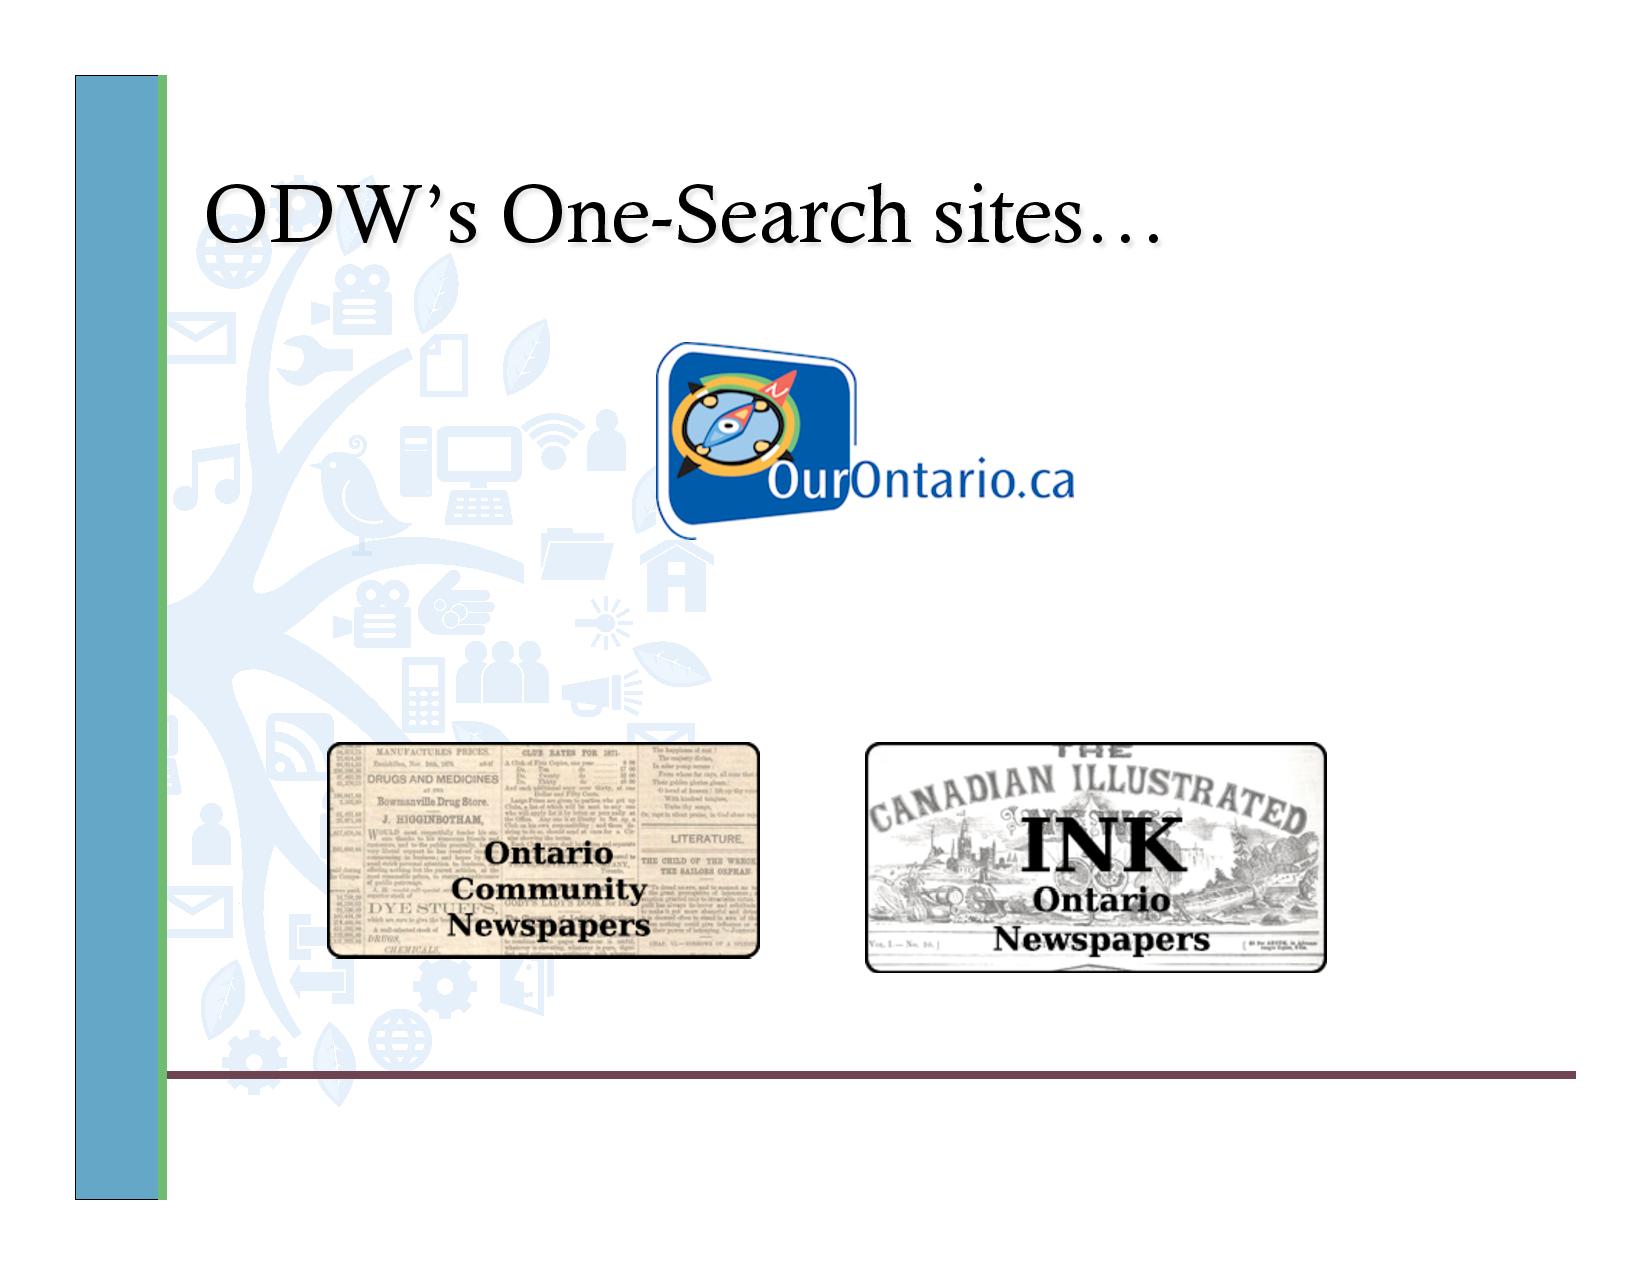 ODW's One search sites